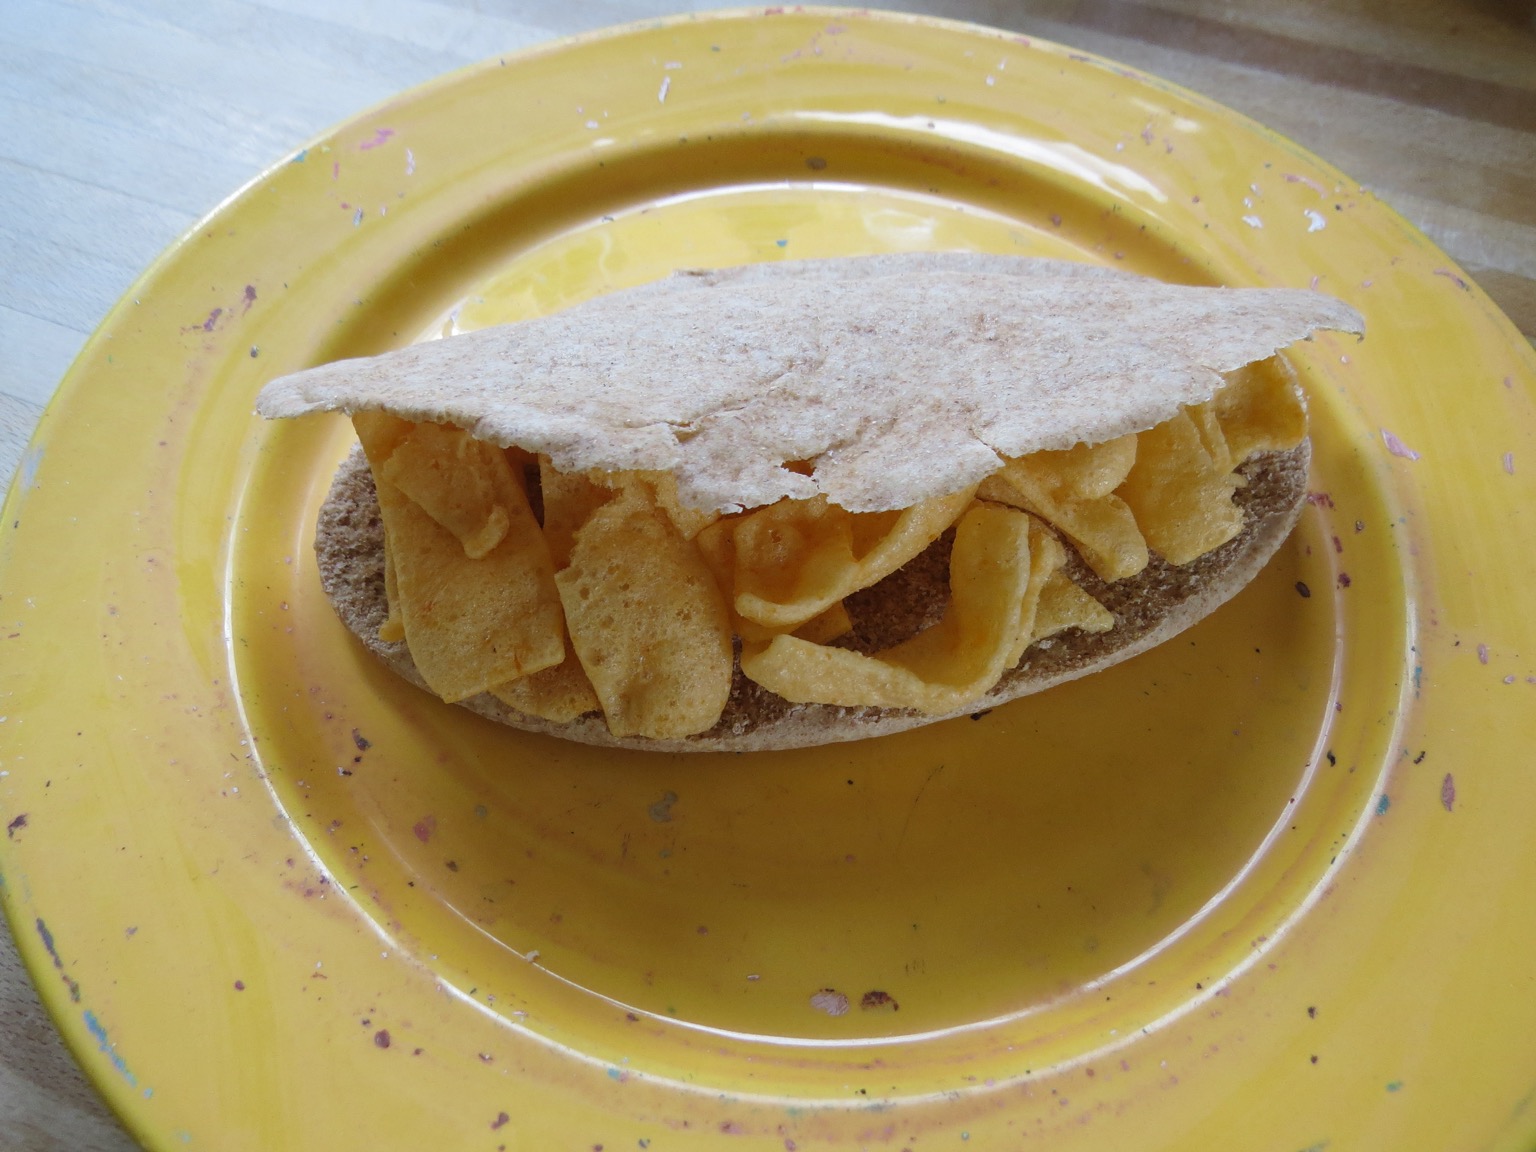 Quavers in a pitta bread on a plate